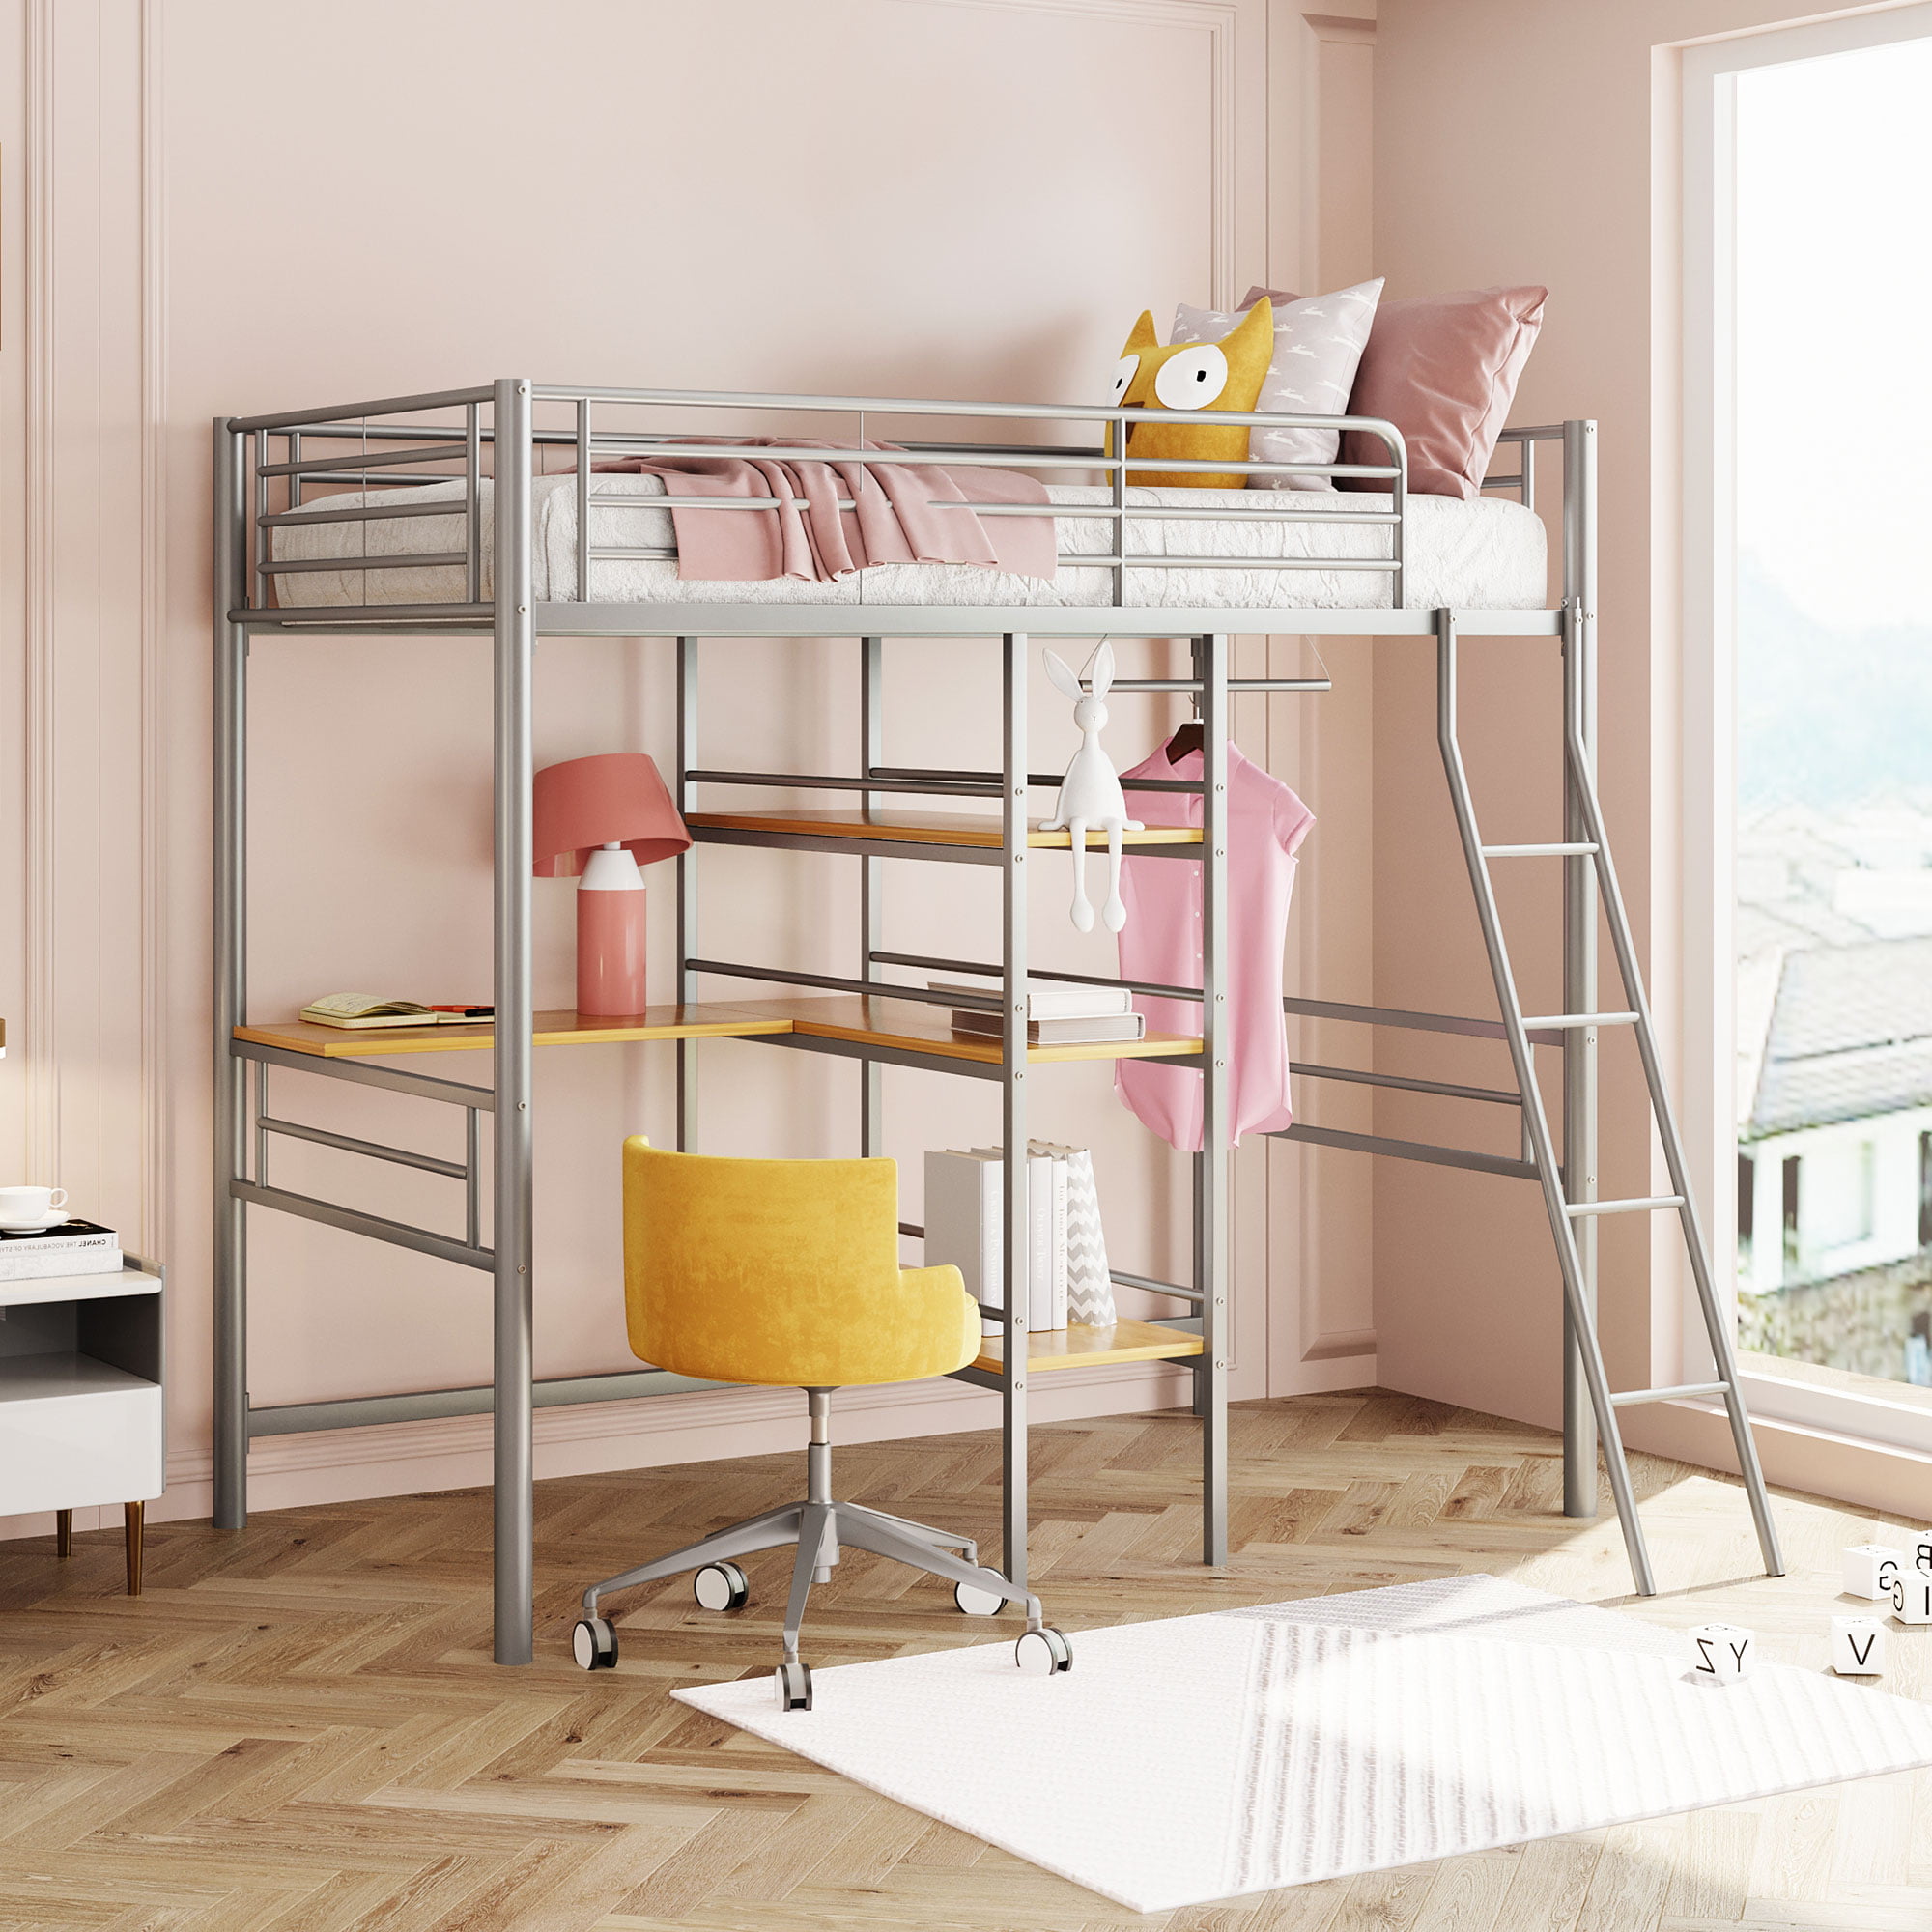 Twin Metal Loft Bed With Desk Shelves, Bunk Bed Rods